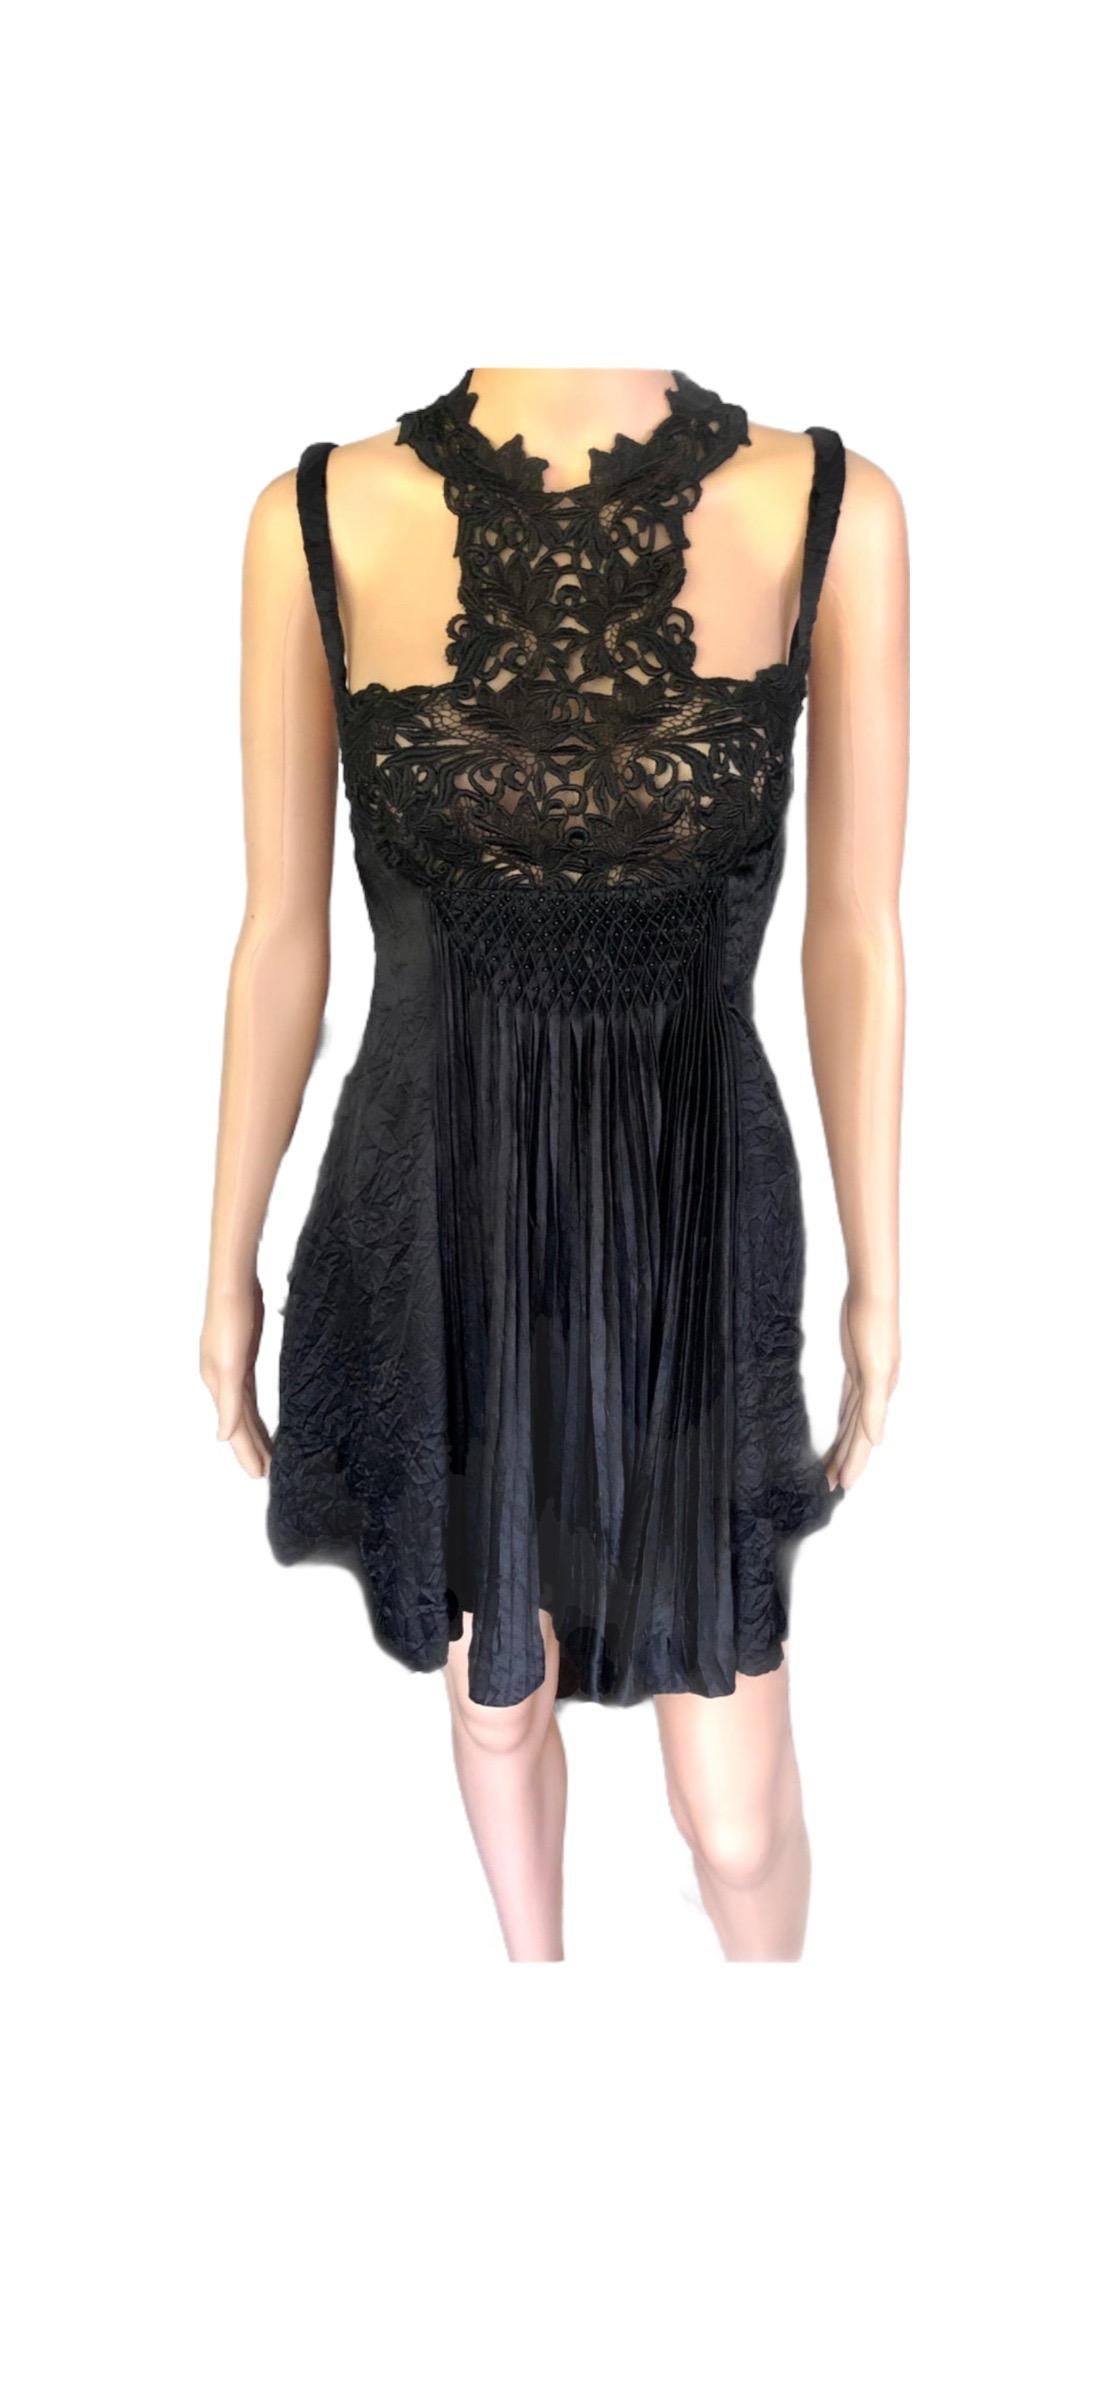 Gianni Versace S/S 1994 Runway Couture Vintage Crinkle Silk Lace Black Dress For Sale 4